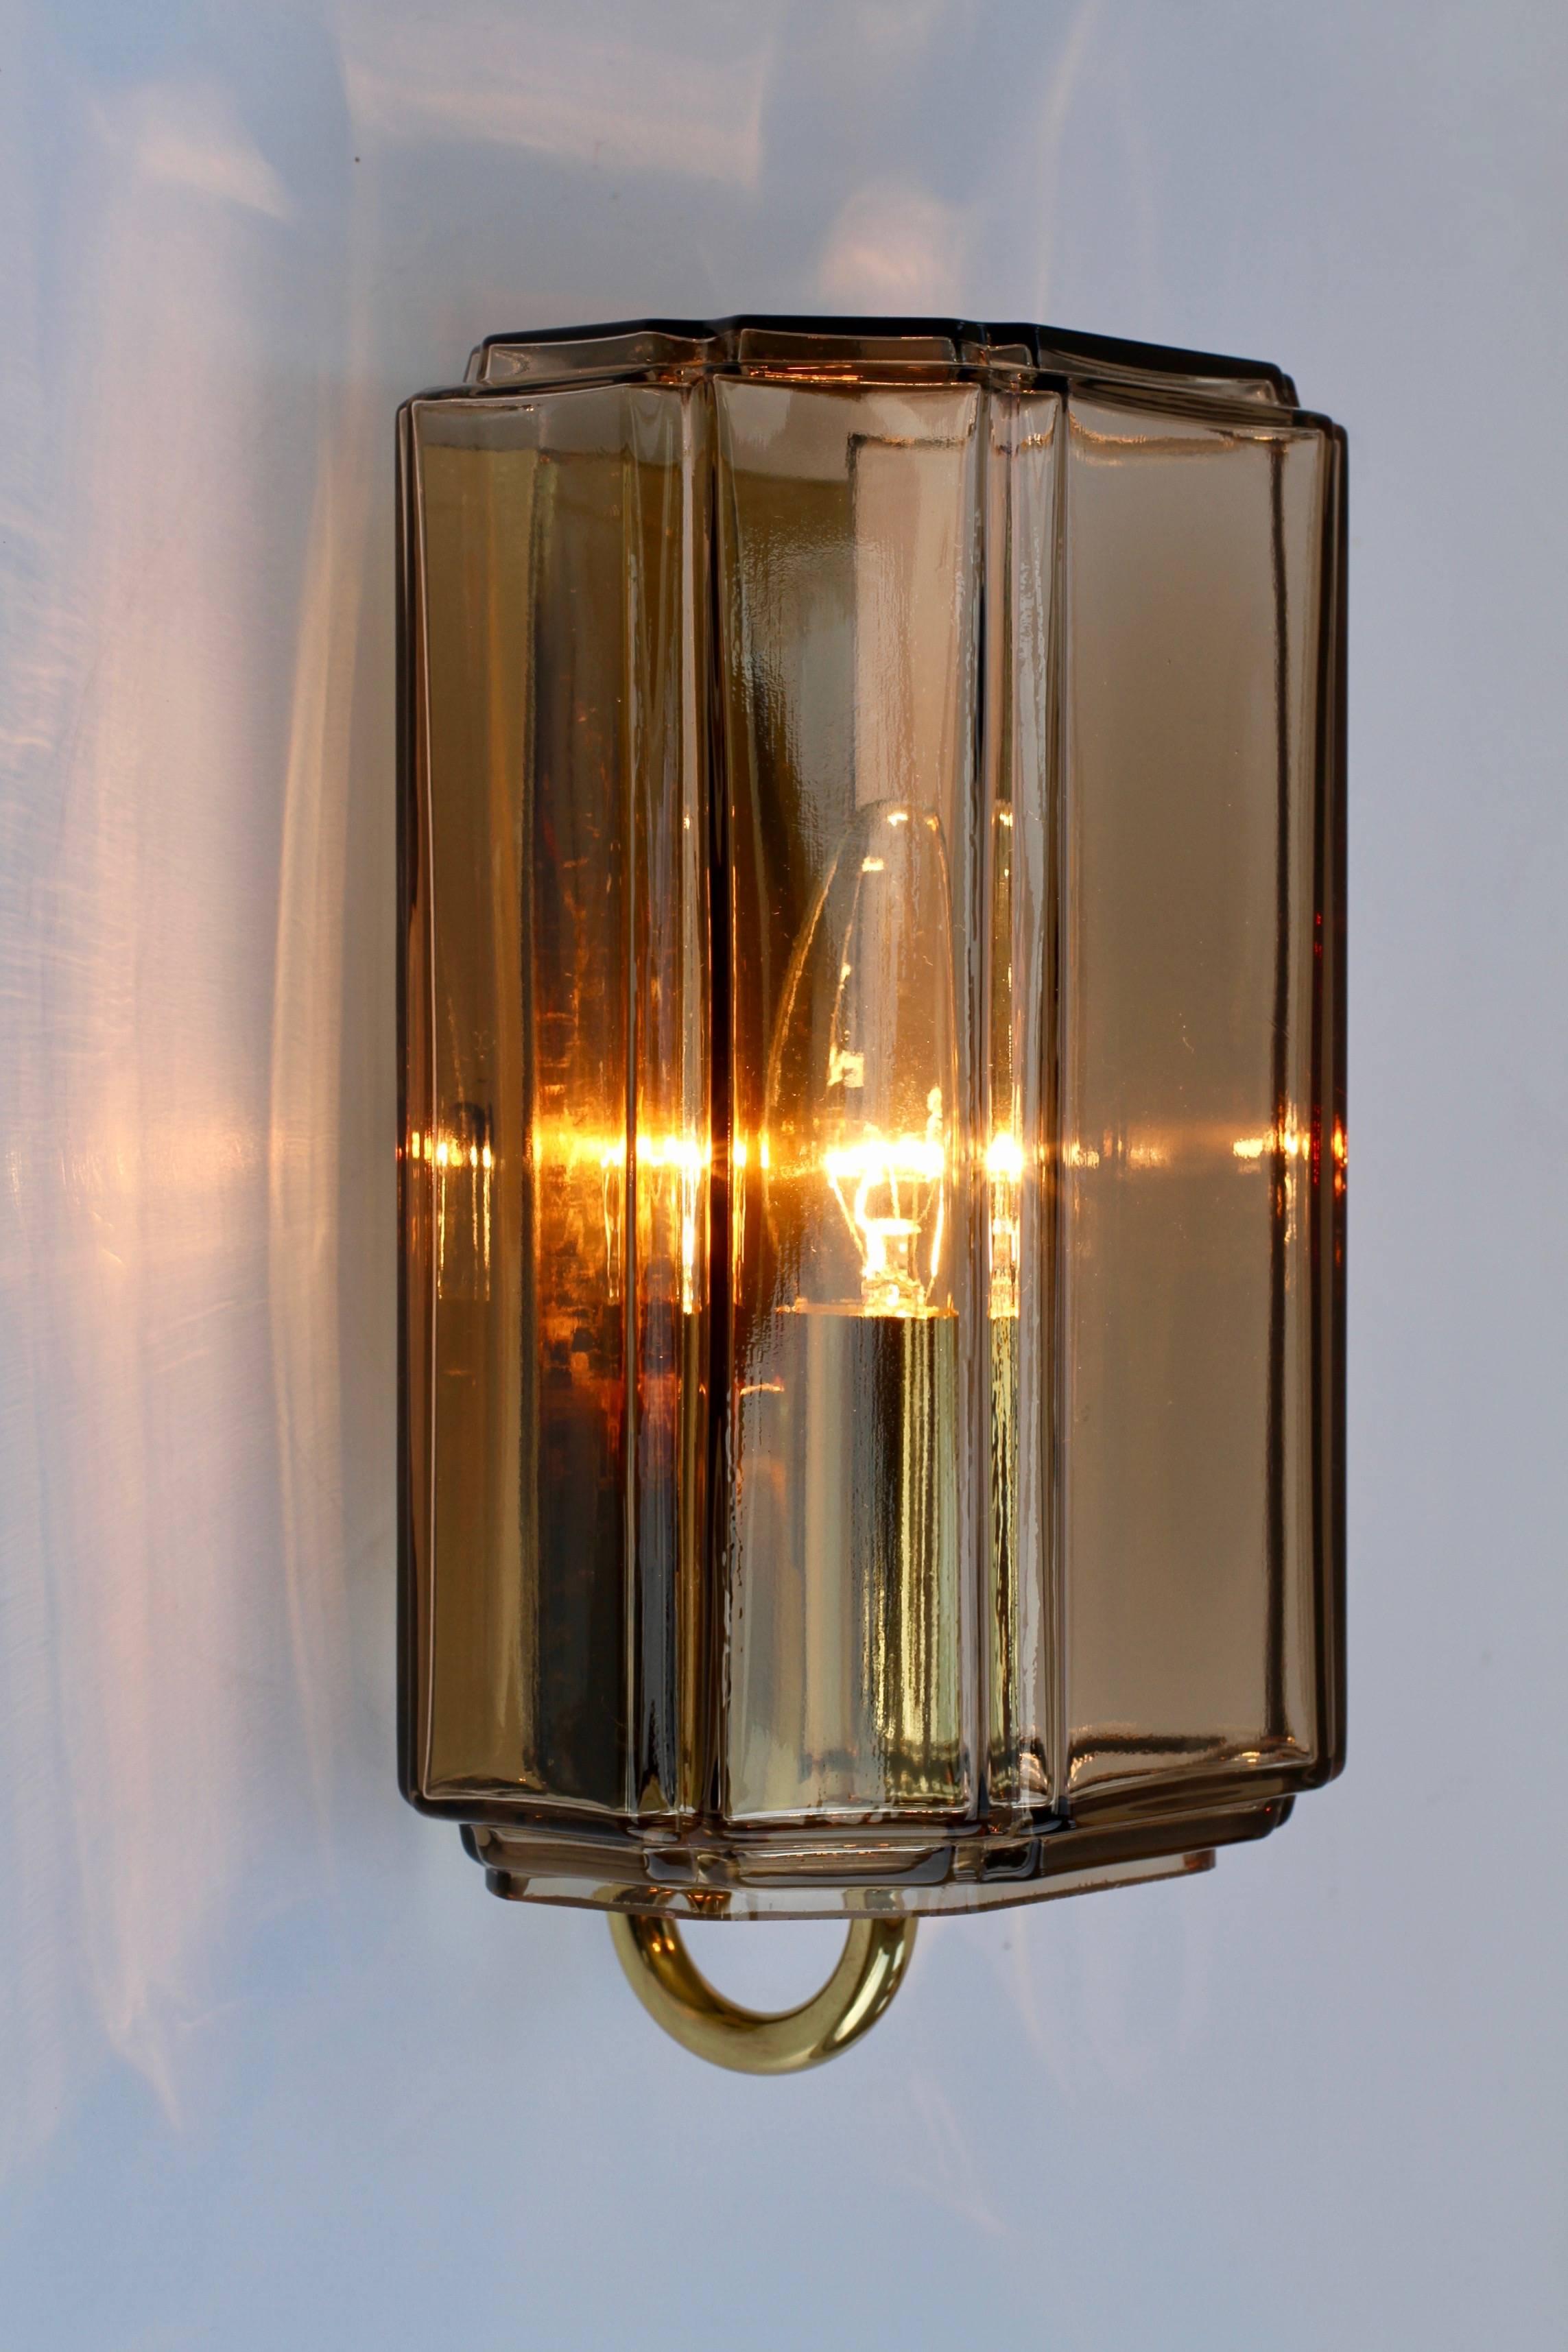 One of a set of three wonderful German wall-mounted single socketed light fixtures, sconces or lamps by Glashütte Limburg, circa 1965-1975. The geometric form of the smoked amber toned / topaz colored/coloured mouth blown glass illuminates